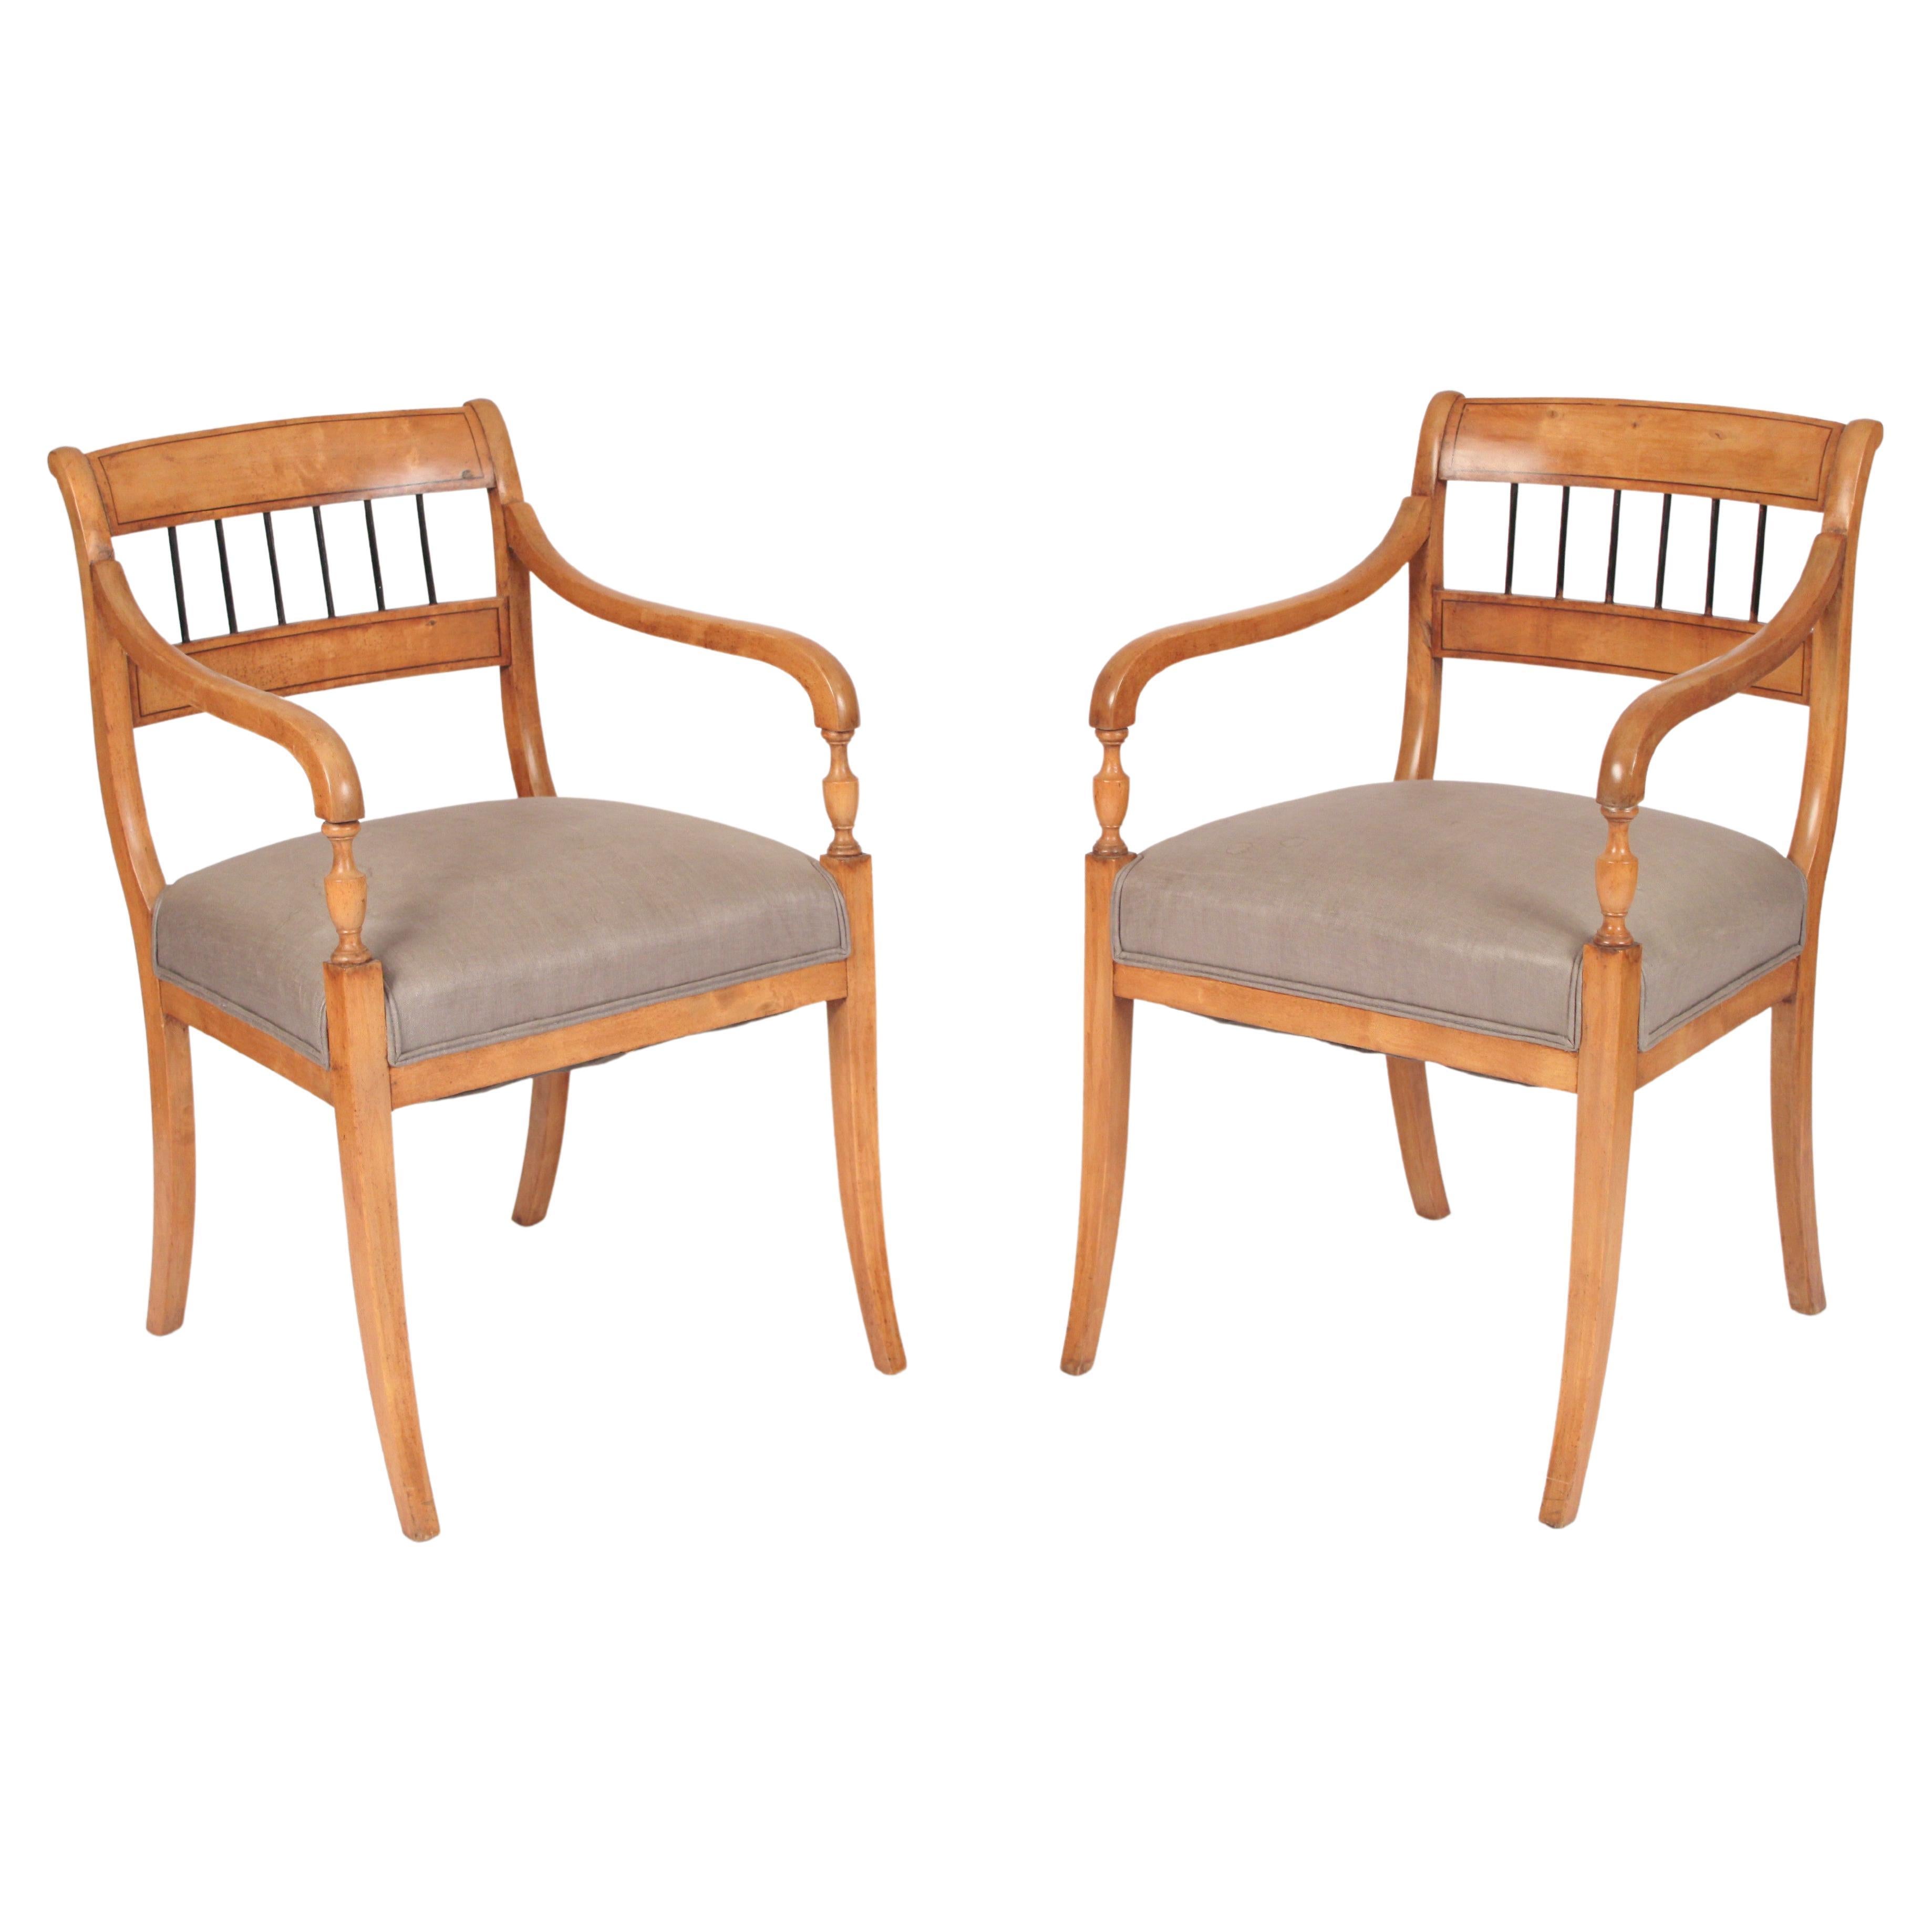 Pair of Neo Classical Style Beech Wood Armchairs